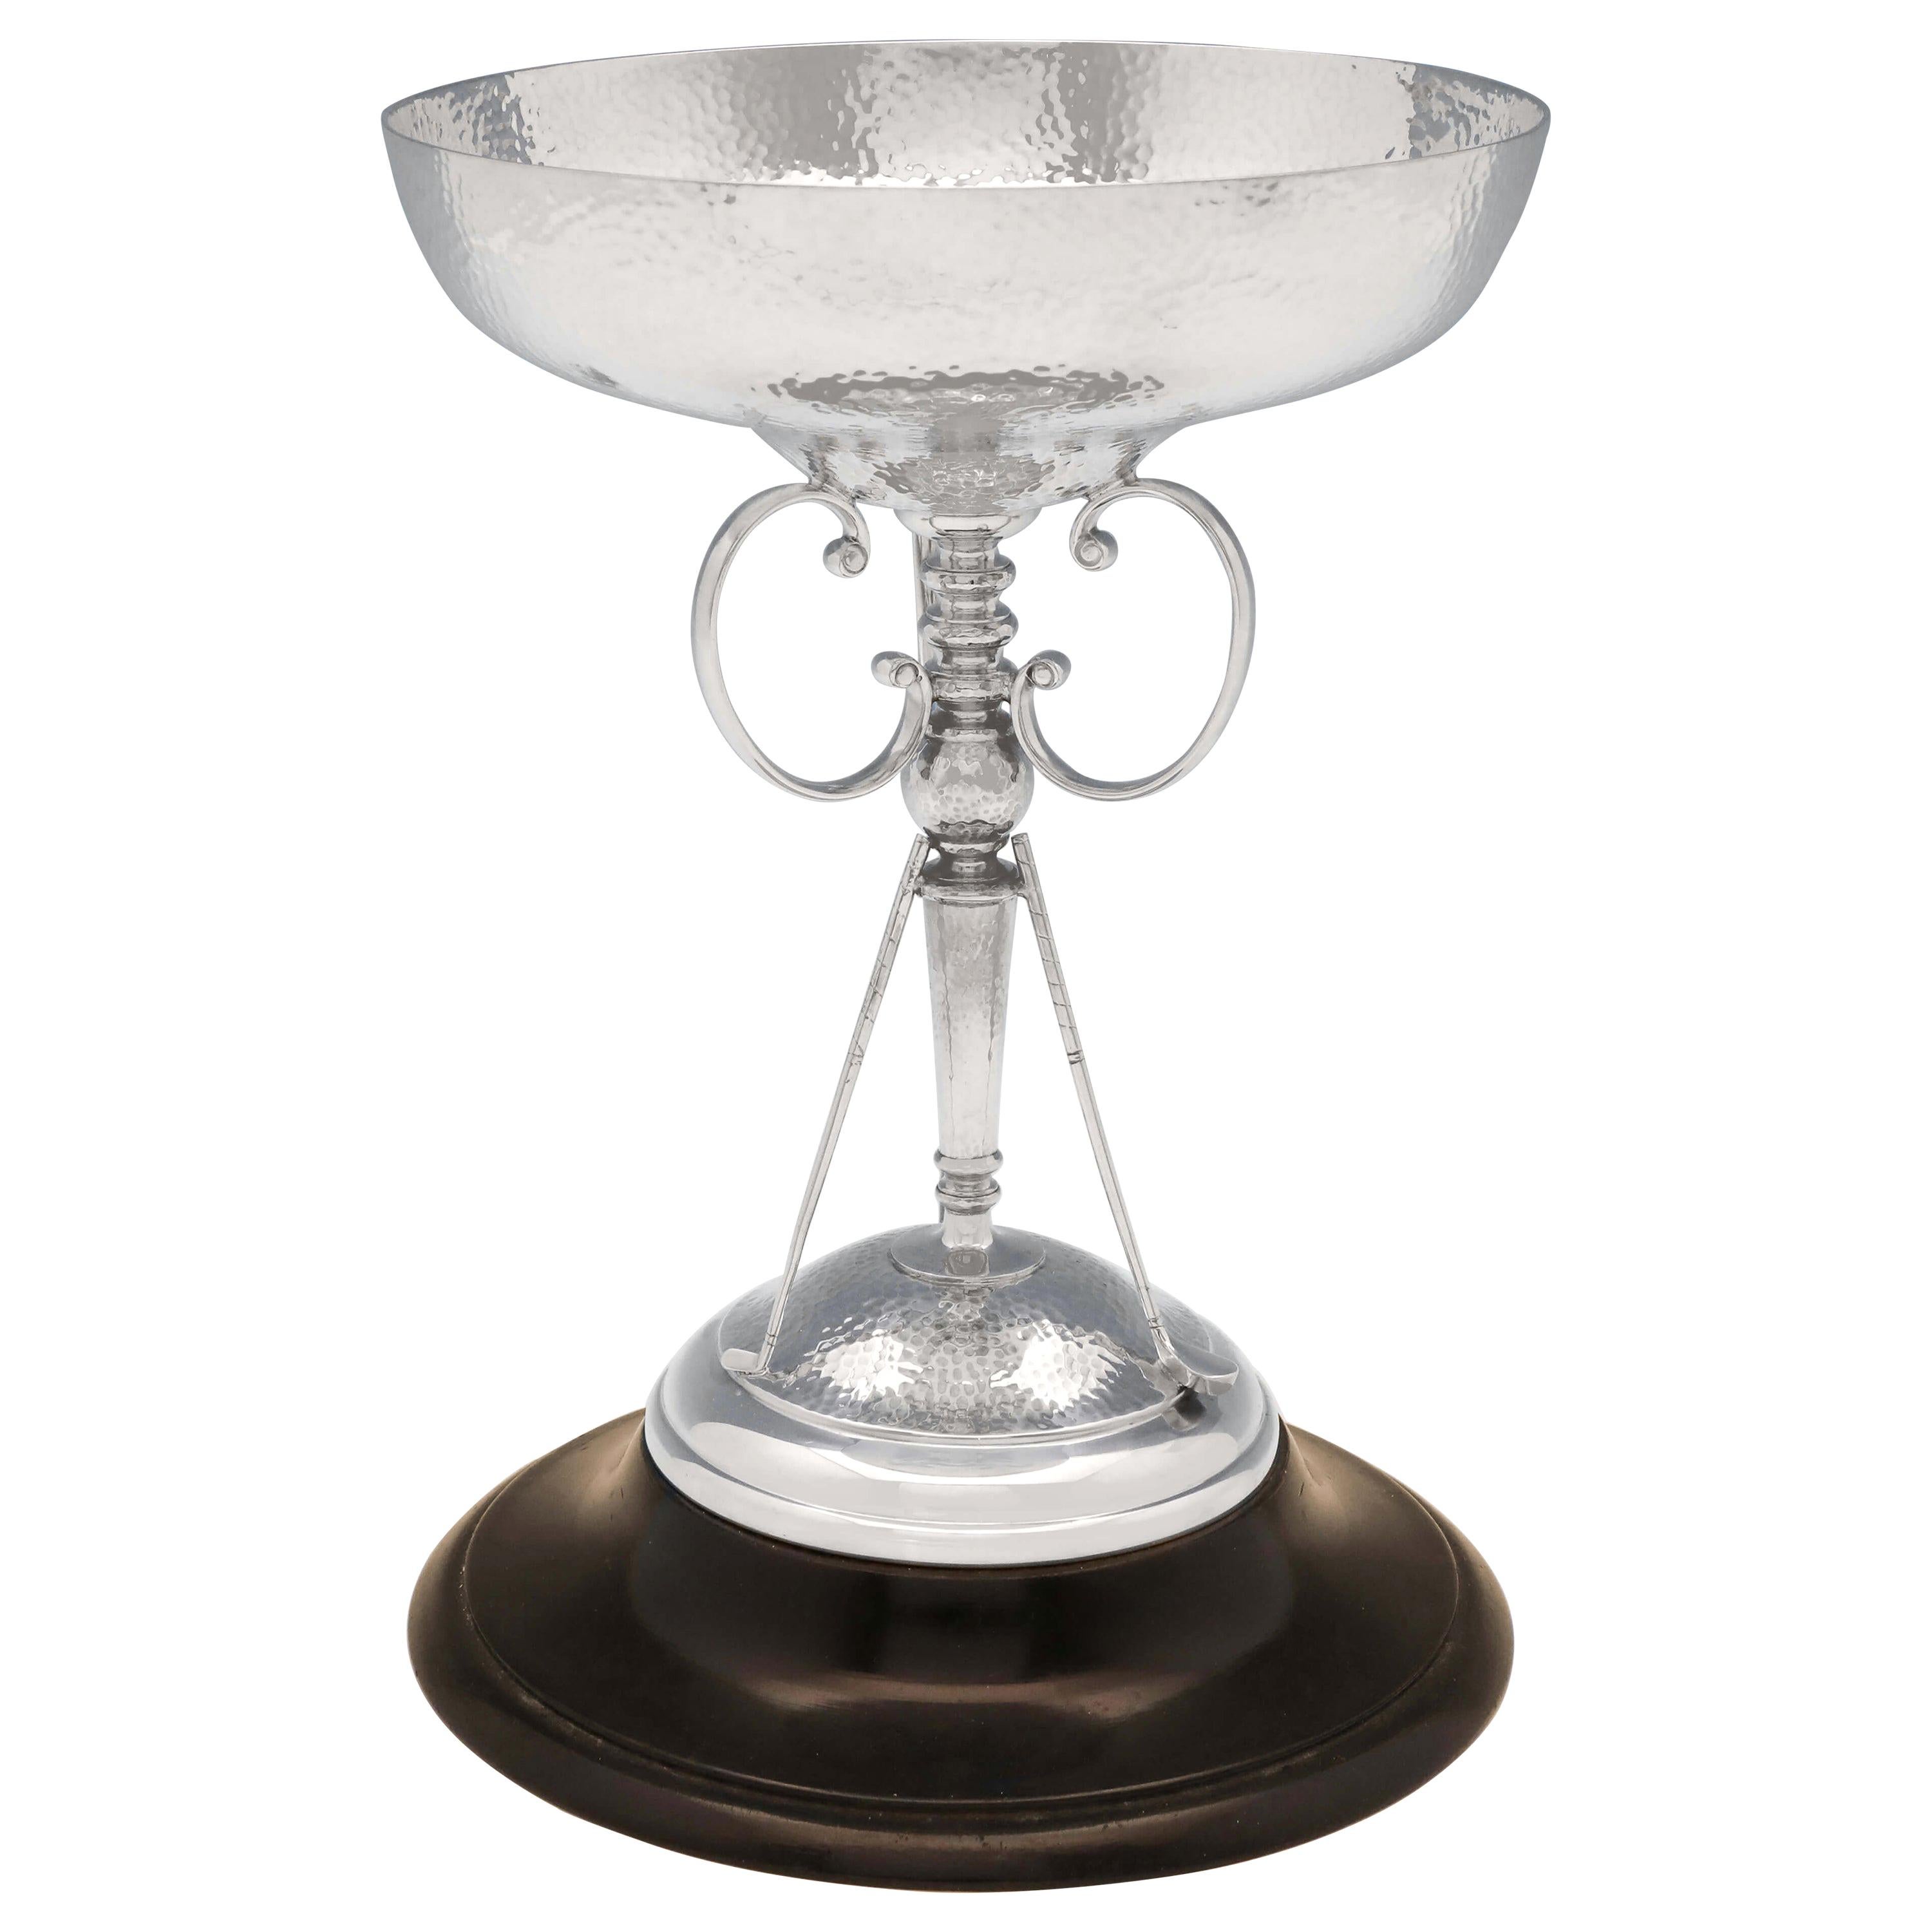 Art Deco Sterling Silver Golf Trophy from 1930 by R. F. Moseley & Co.